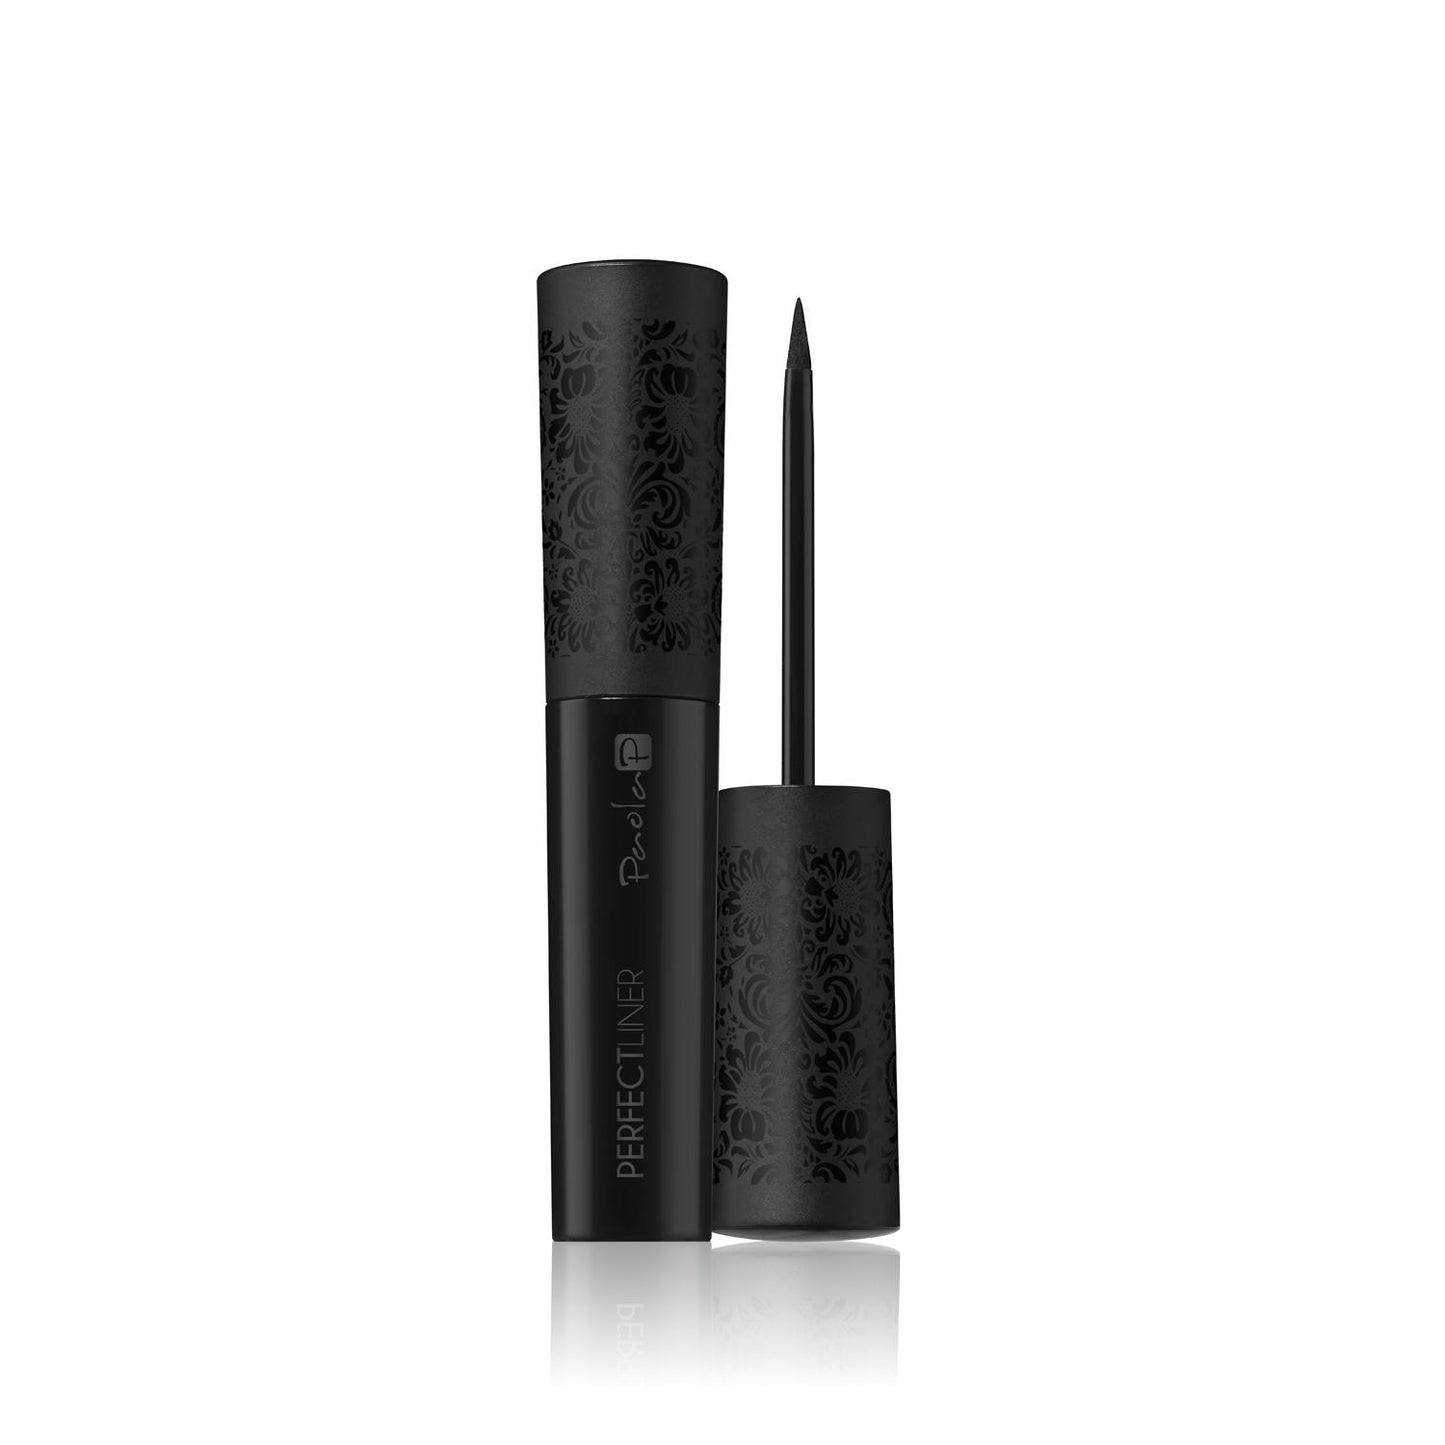 PaolaP perfect liner 01 - NERO